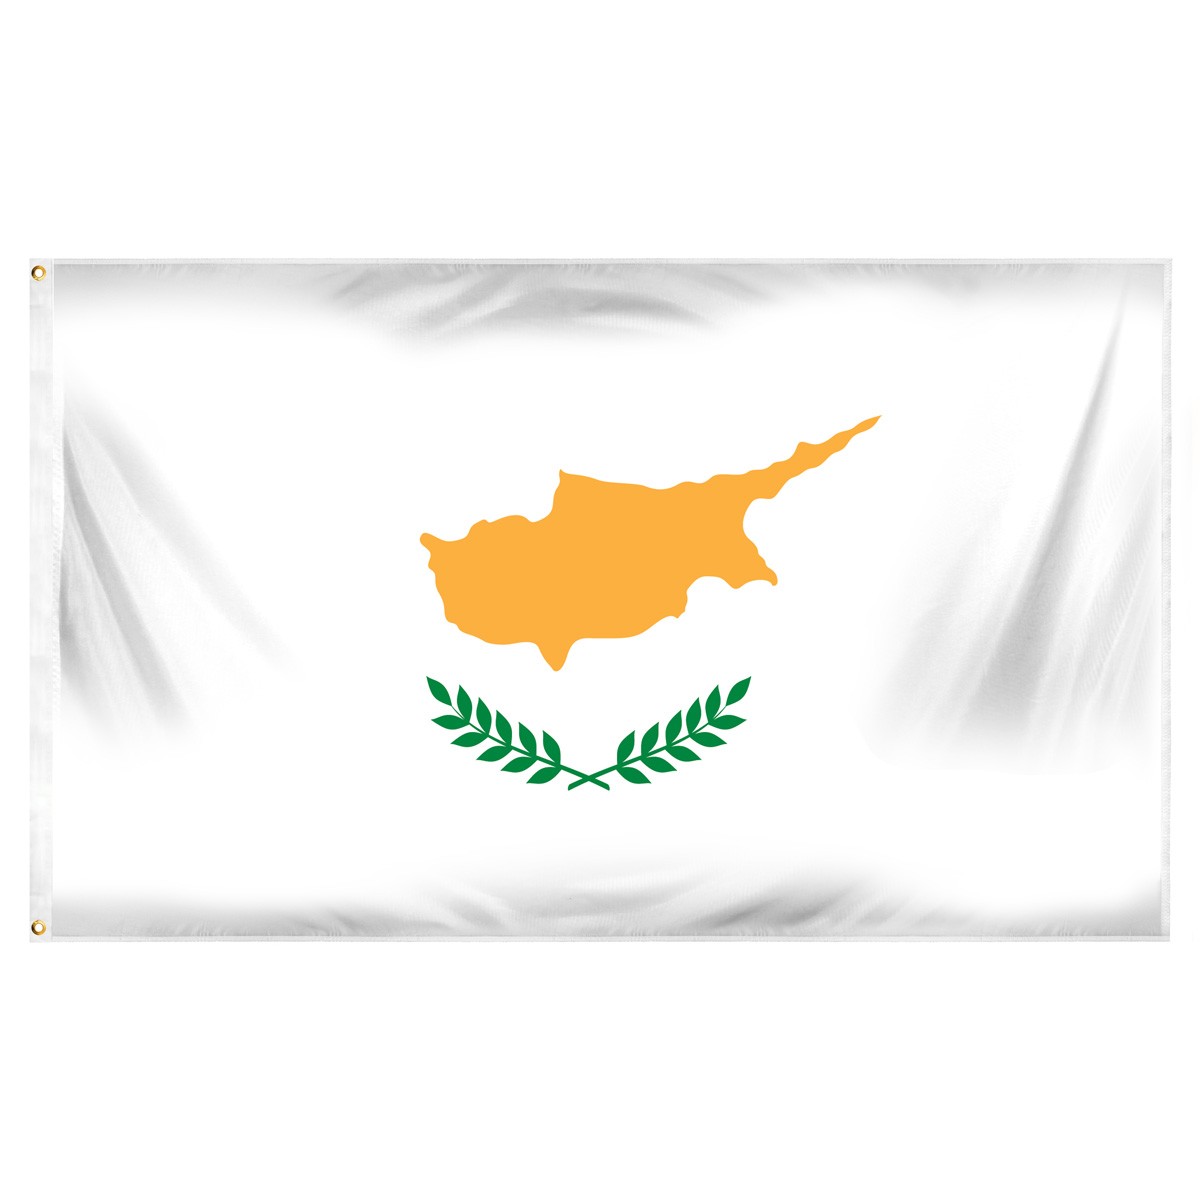 Republic of Cyprus Executive Flags